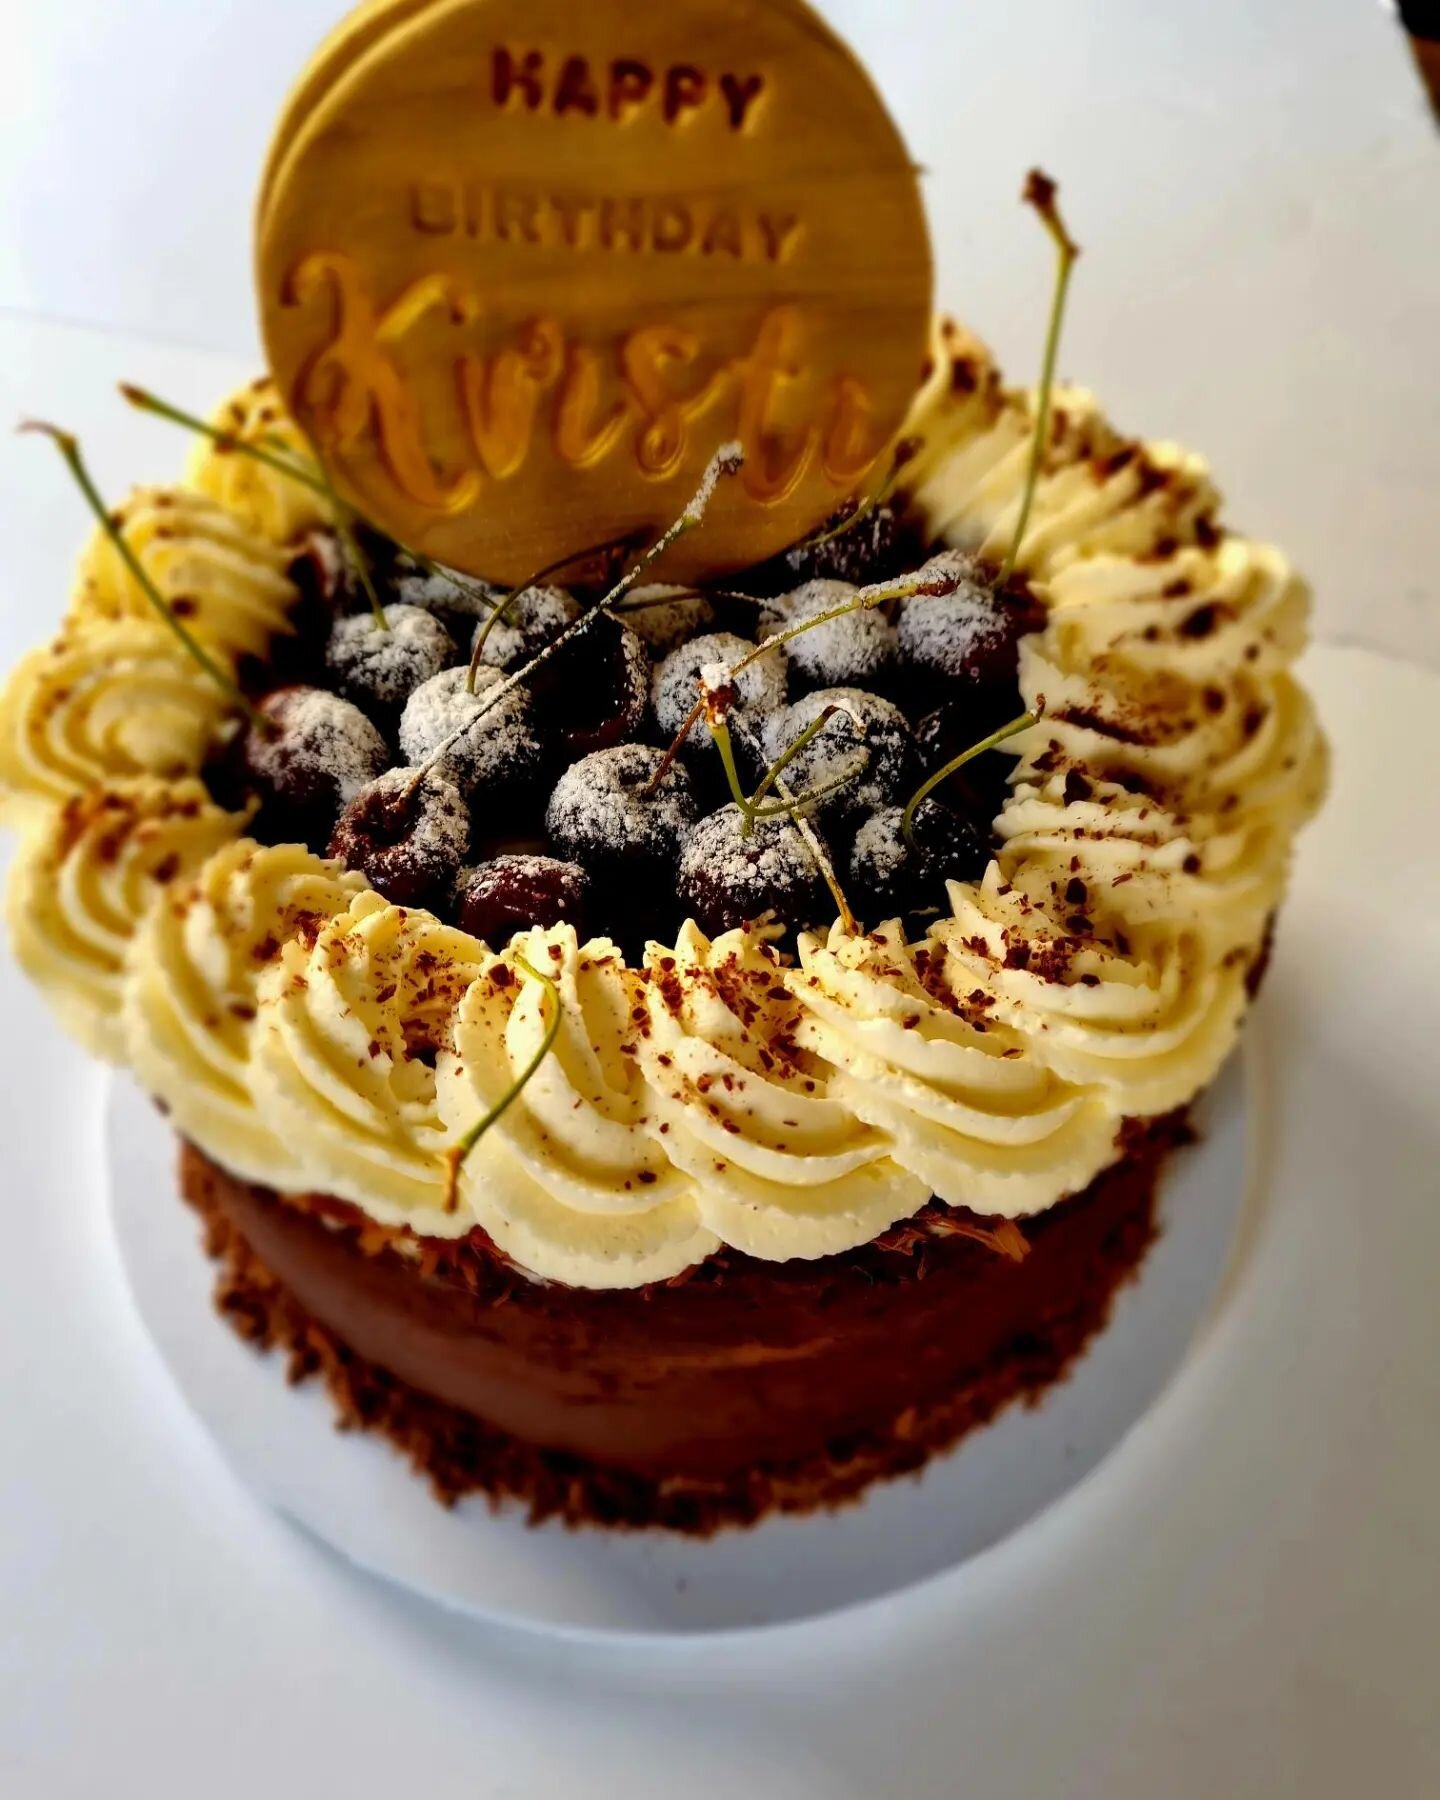 The answer to yesterday question is Black Forest - Cherry and Chocolate Flavour

@ourlitttlecanford would you like to claim your cupcakes? 

#blackforestcake #blackforest #chocolateandcherrycake #birthday #cakeitis #celebration #birthdaycelebration #